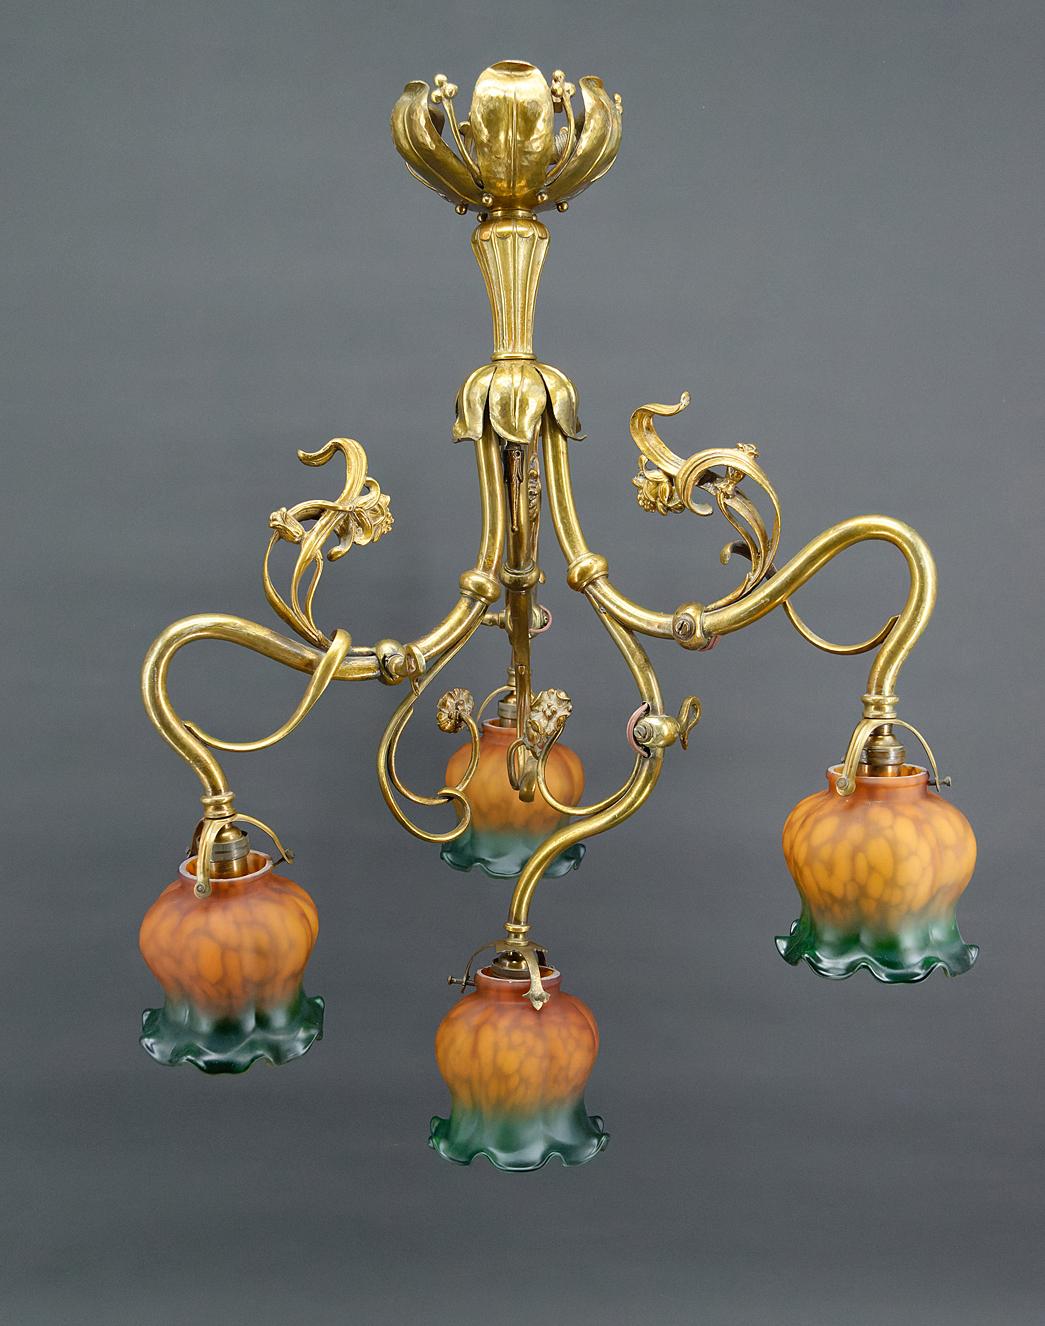 Superb Art Nouveau chandelier in gilded bronze with floral/plant motifs, formerly gas powered, electrified.
4 lights. Lampshades / floral tulips in multicolored glass paste.

France, Circa 1890

In very good condition.

Dimensions:
Height 66